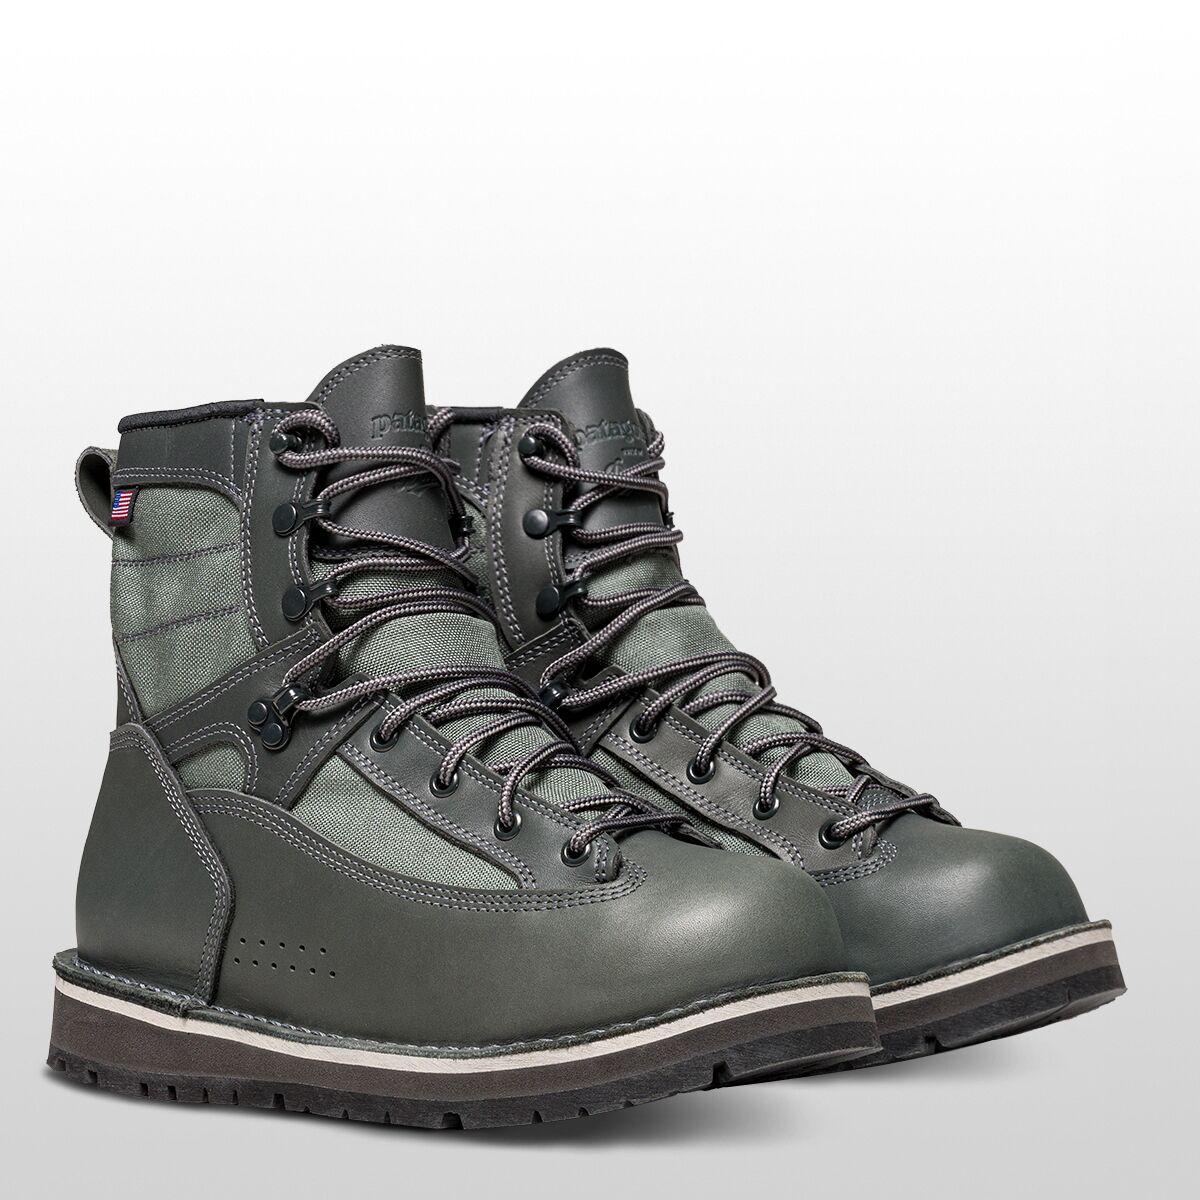 Patagonia River Salt Wading Boots (Built By Danner) Royal Gorge Anglers ...